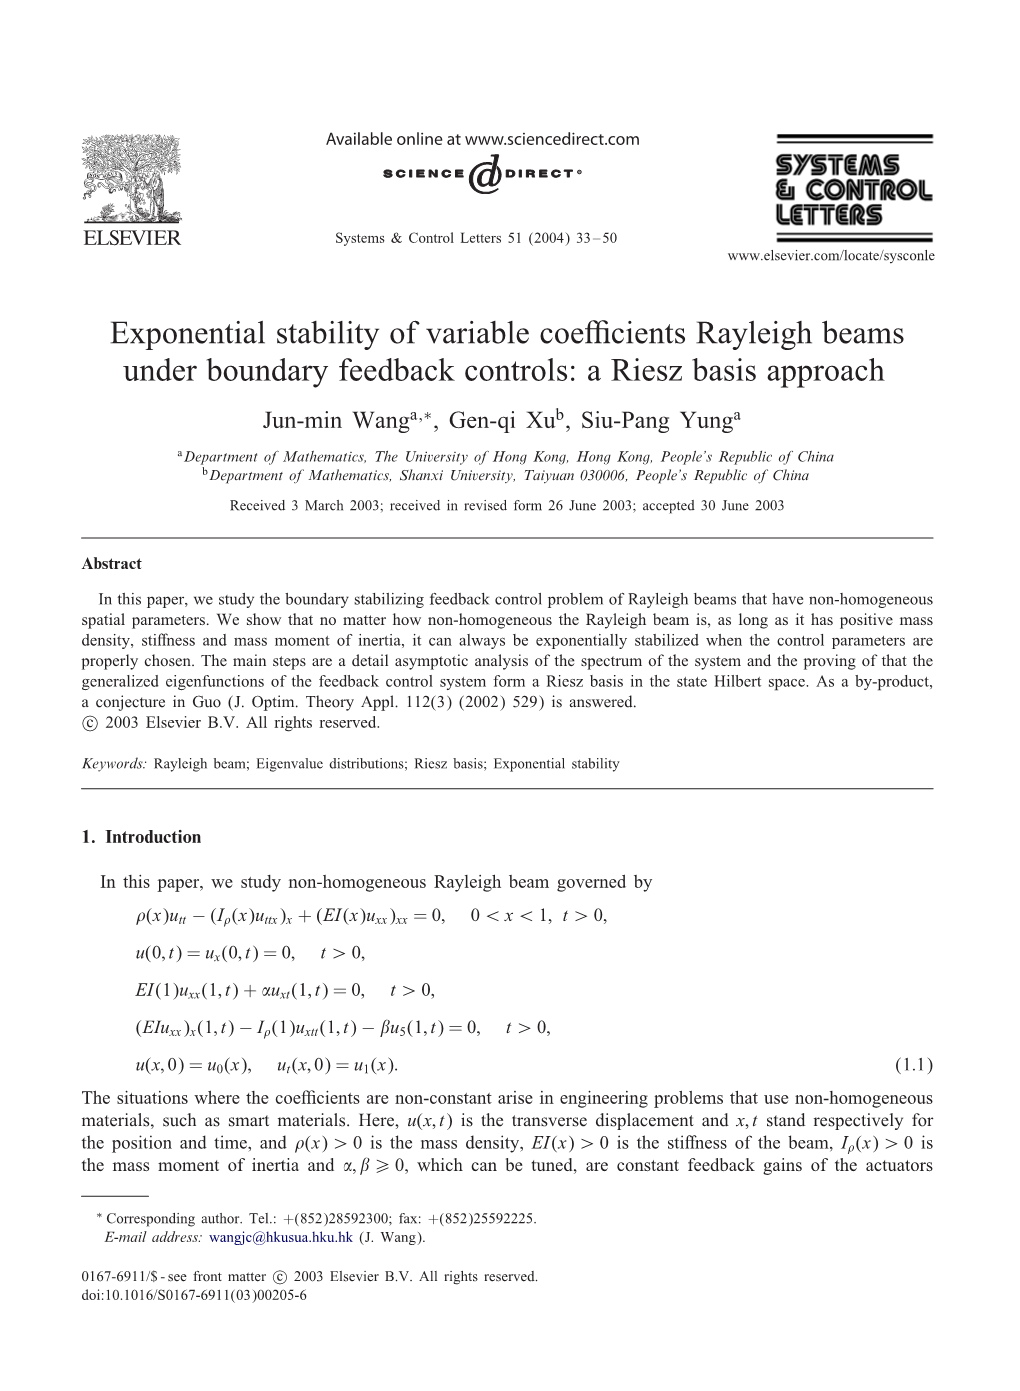 Exponential Stability of Variable Coe Cients Rayleigh Beams Under